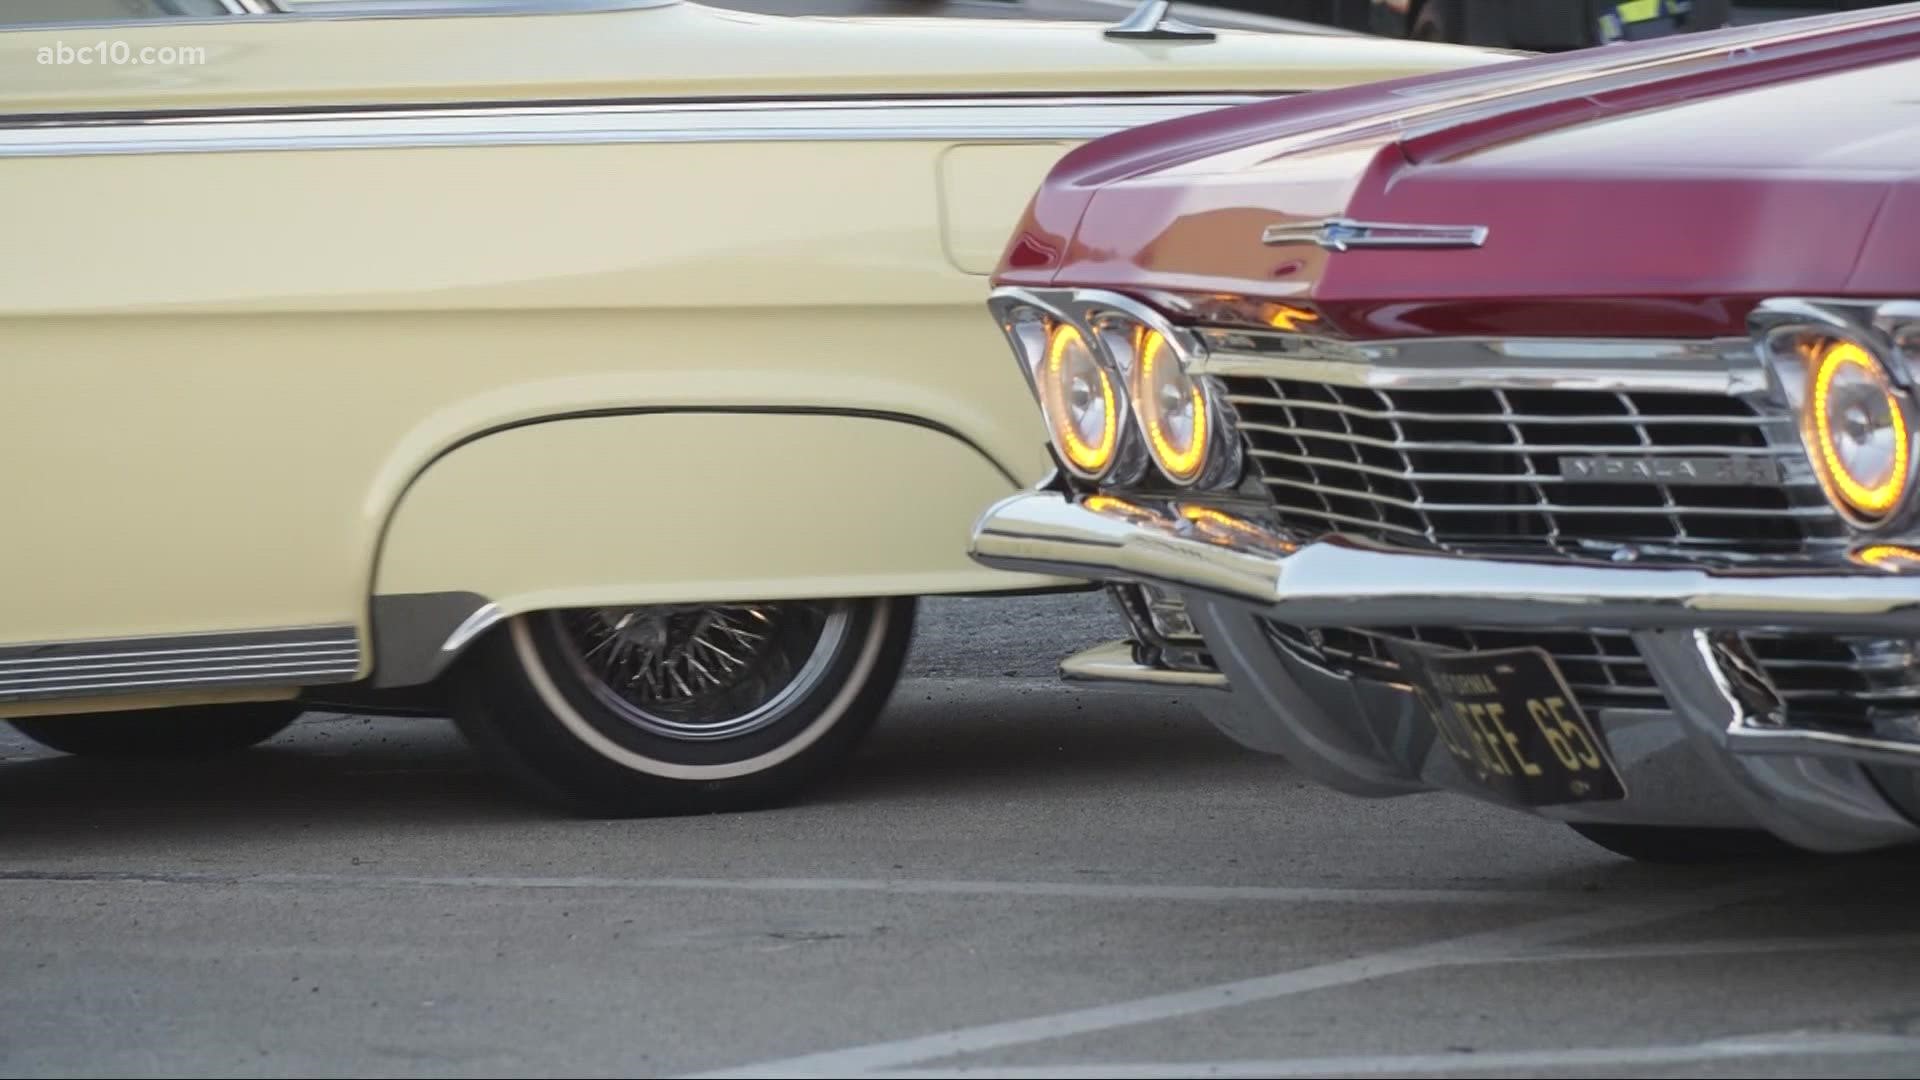 The city of Sacramento's new safe ground site at Miller Park occupies a street that lowriders have cruised for decades.